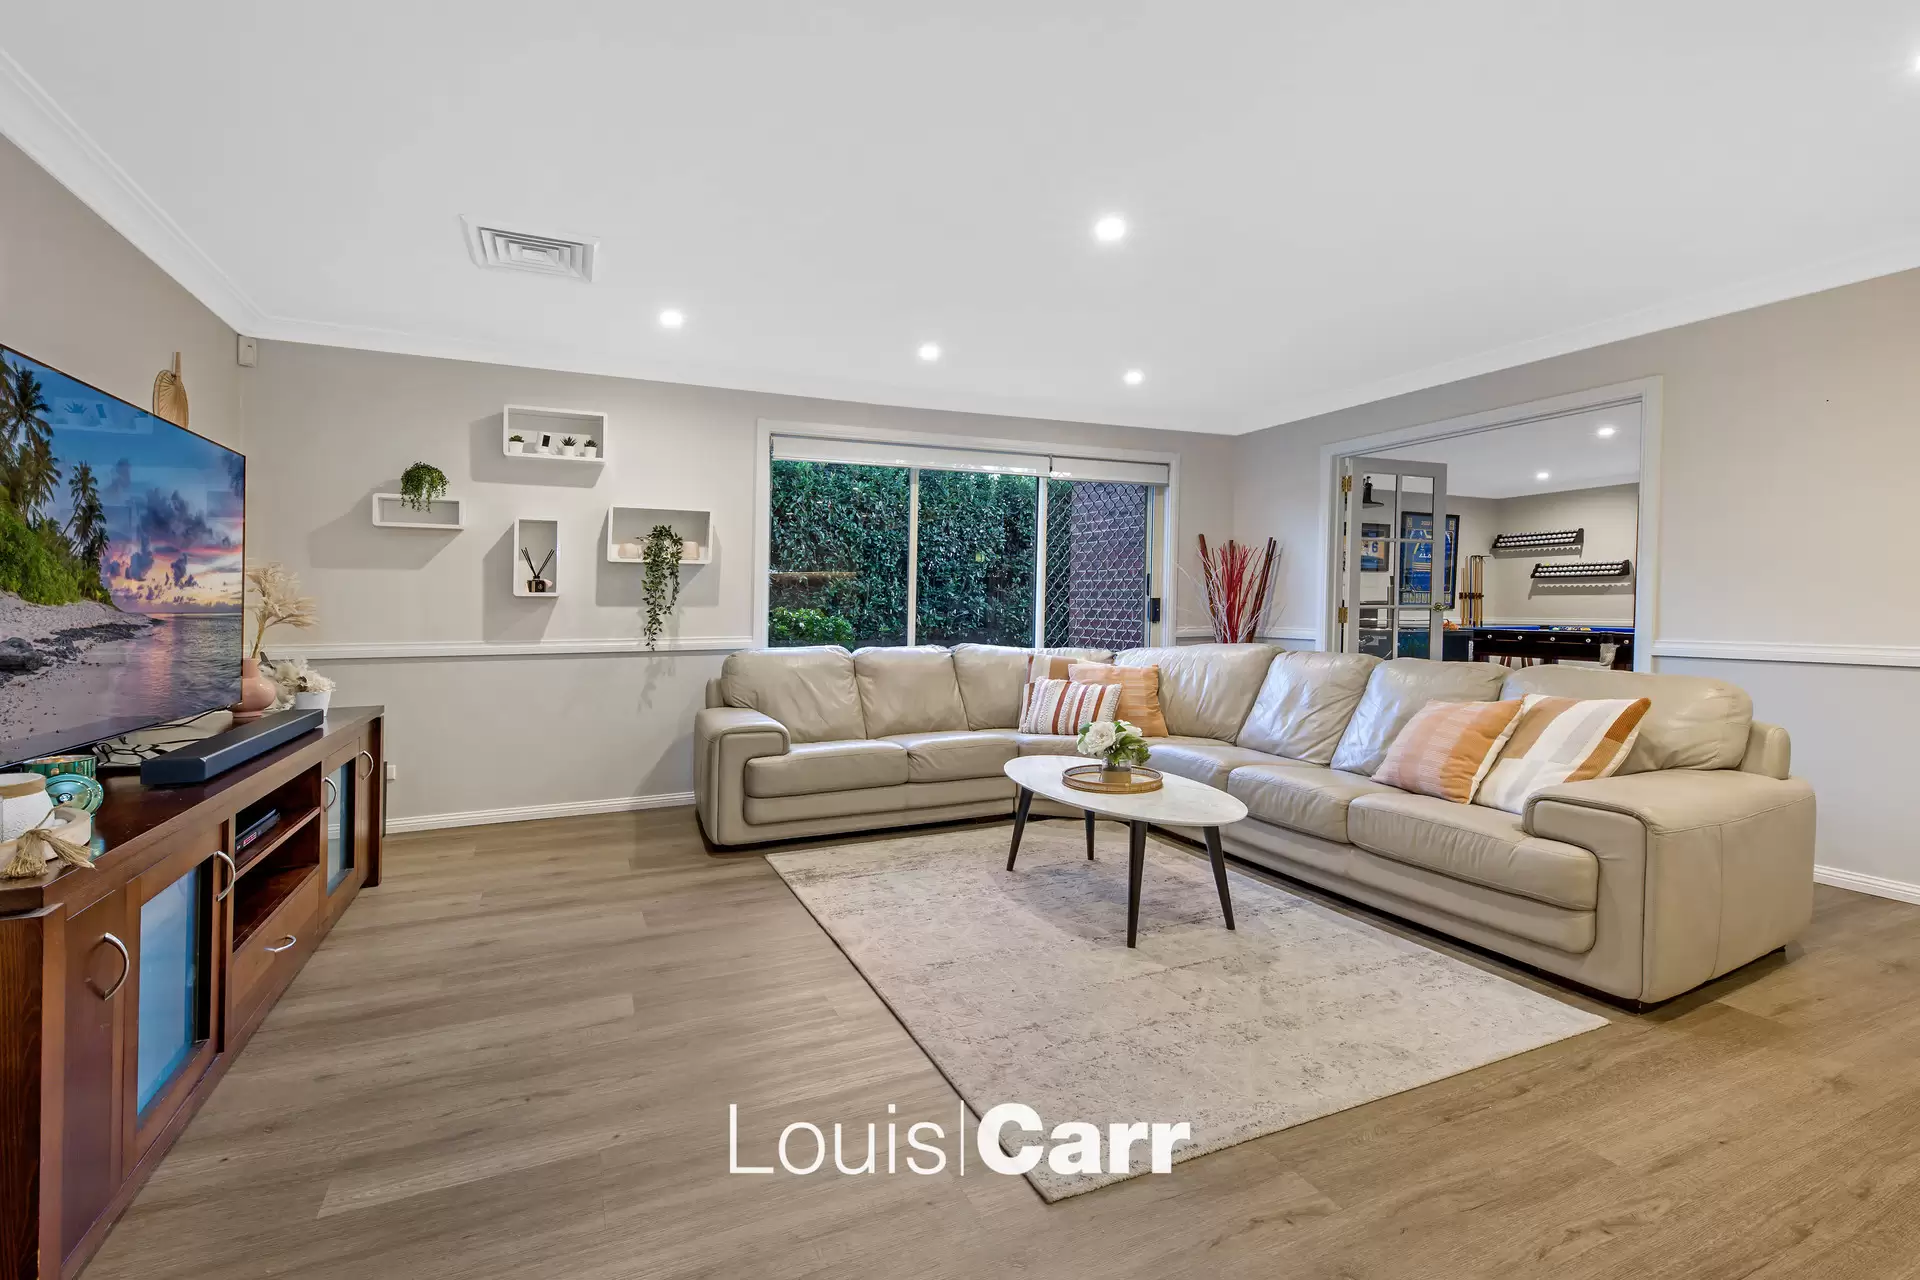 Photo #7: 4 Rooke Court, Kellyville - Sold by Louis Carr Real Estate